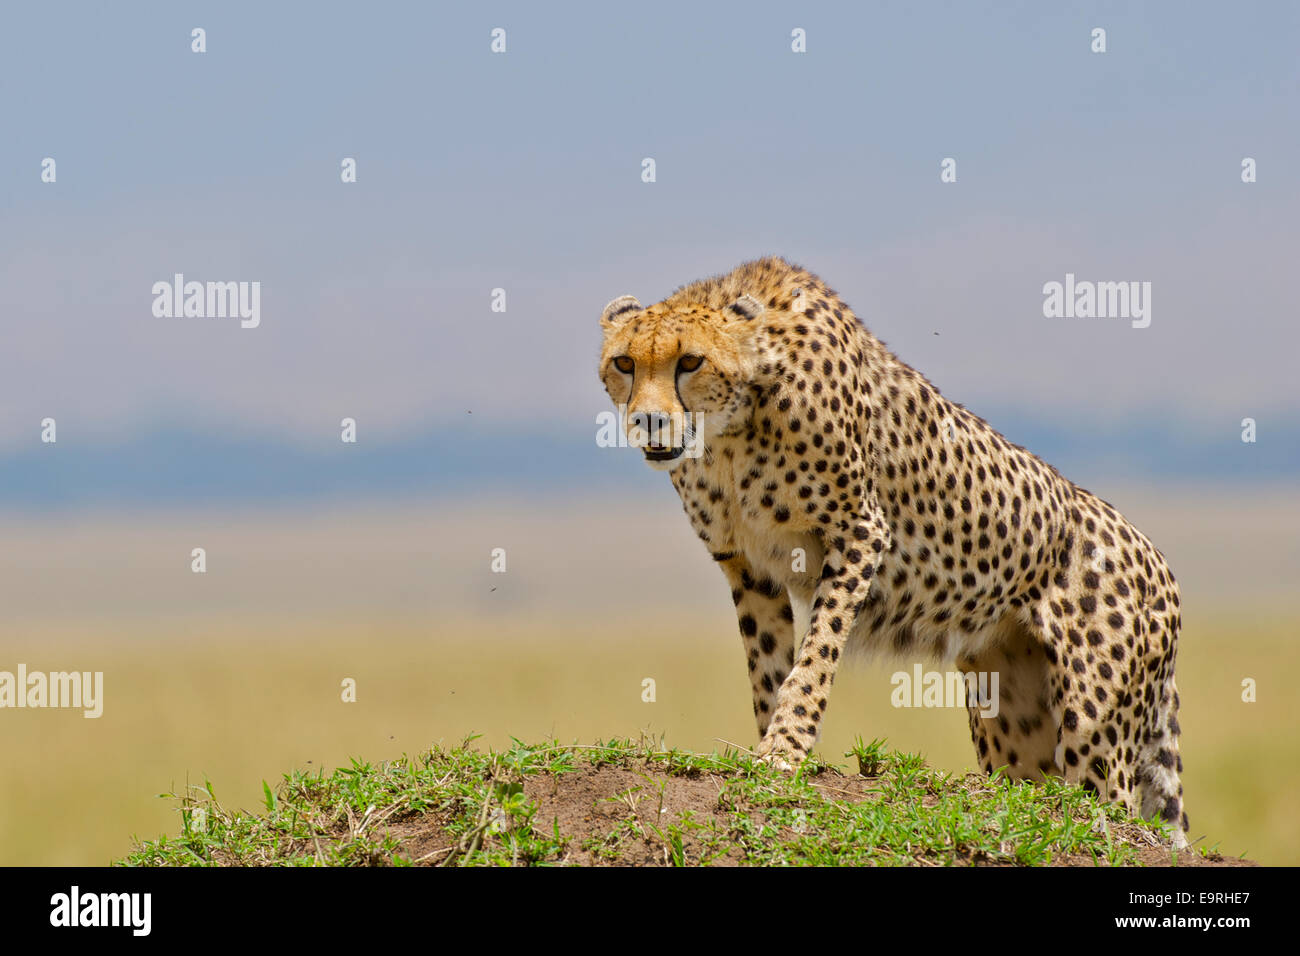 Cheetah (Acinonyx jubatus)   A cheetah climbing a termite mound. Termite mounds are favourite vantage points from which to obser Stock Photo